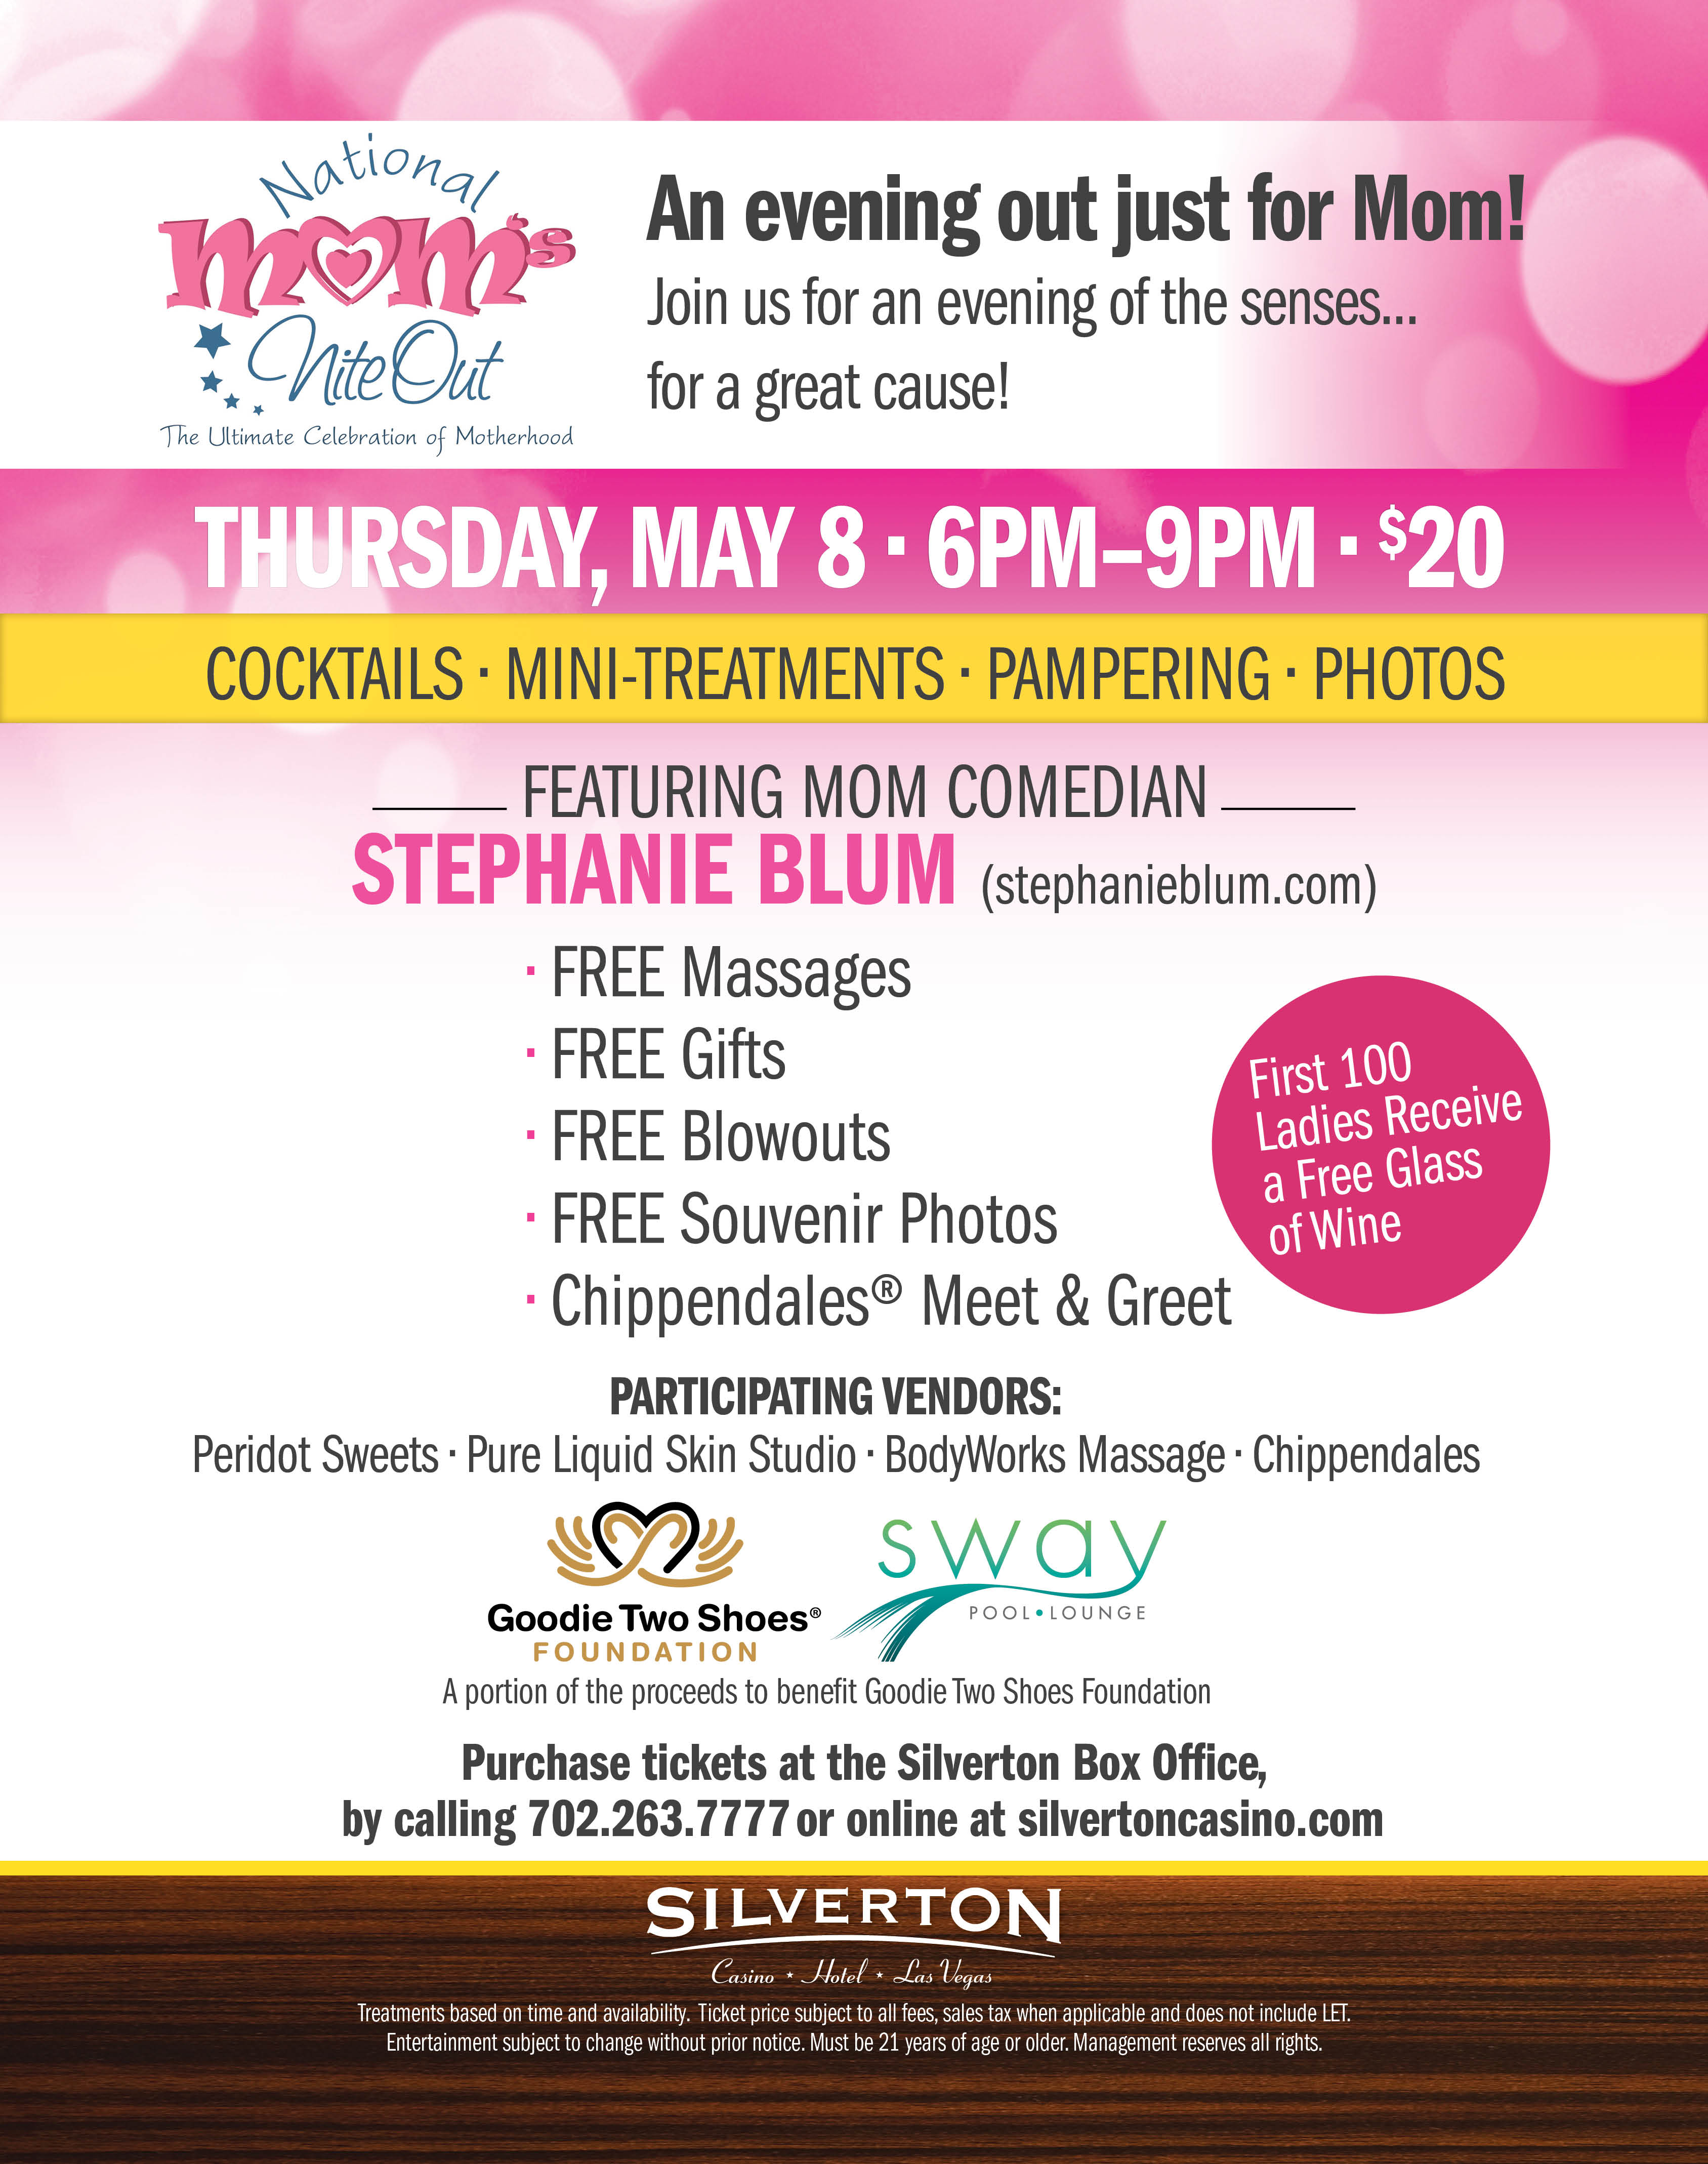 National Mom's Nite Out Event at Silverton Casino Hotel